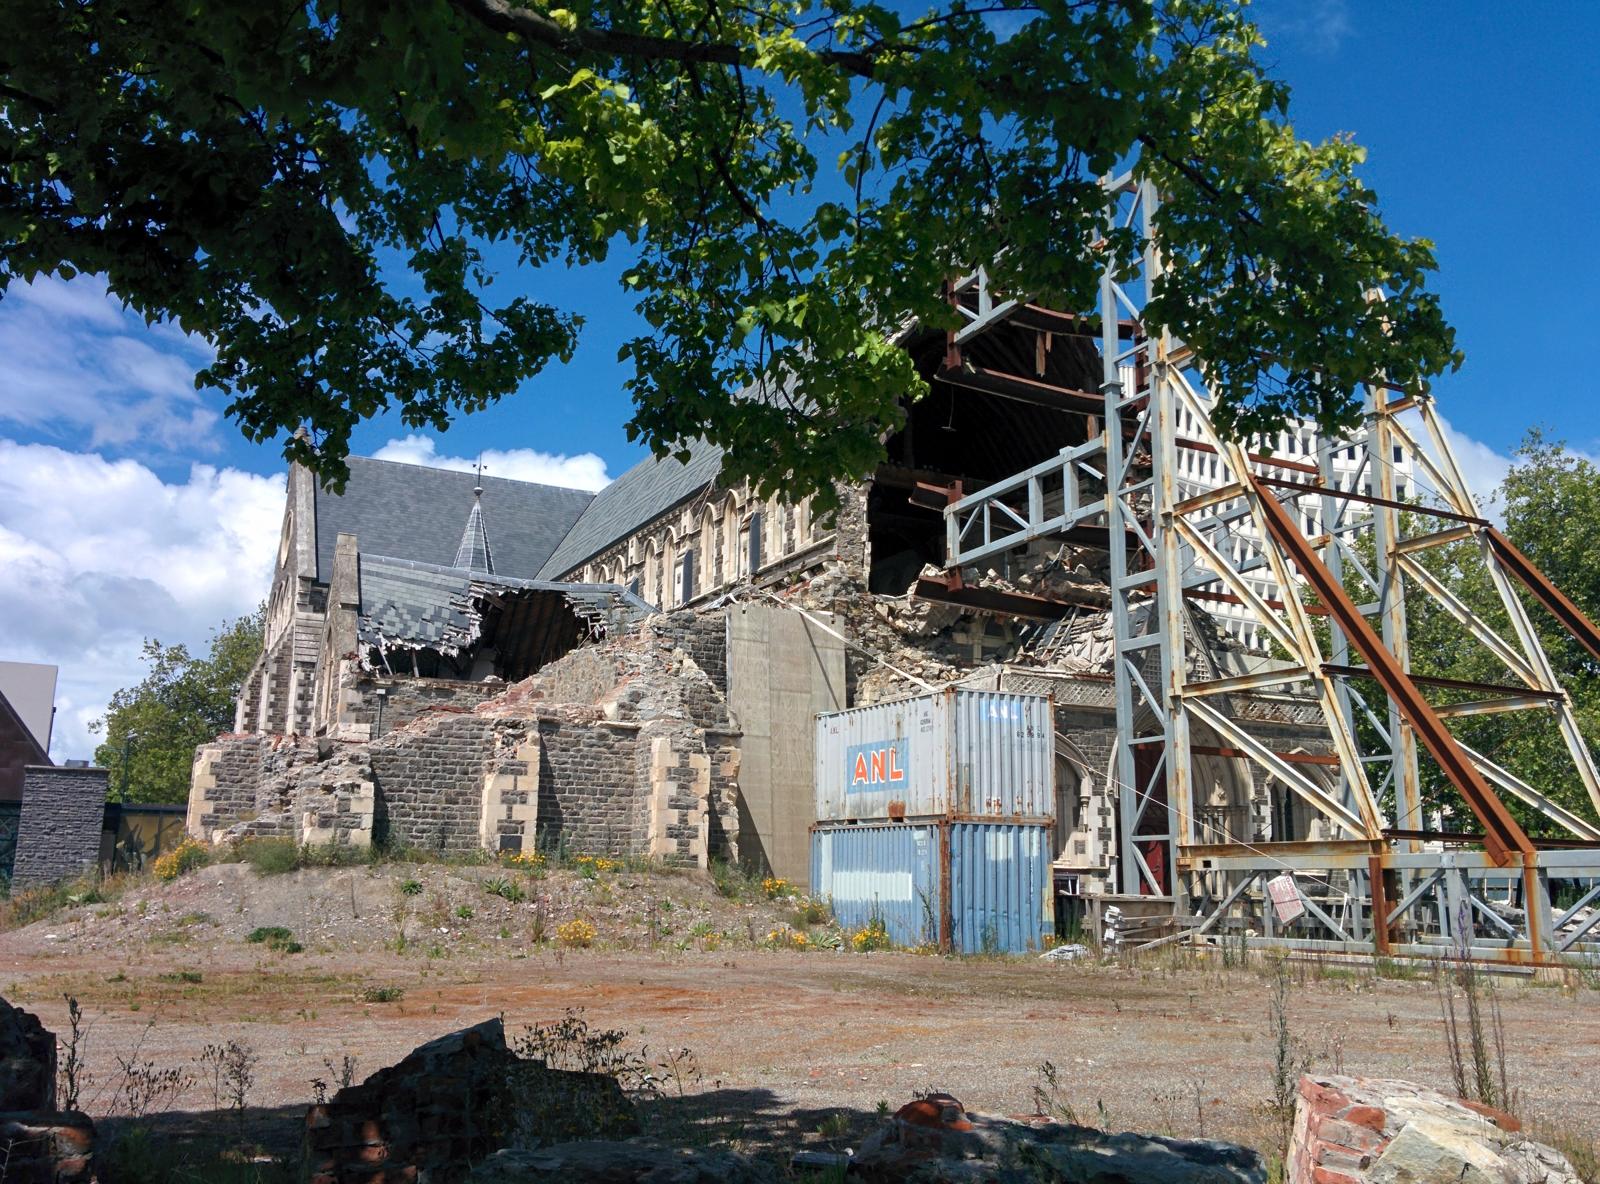 What's left of the primary church